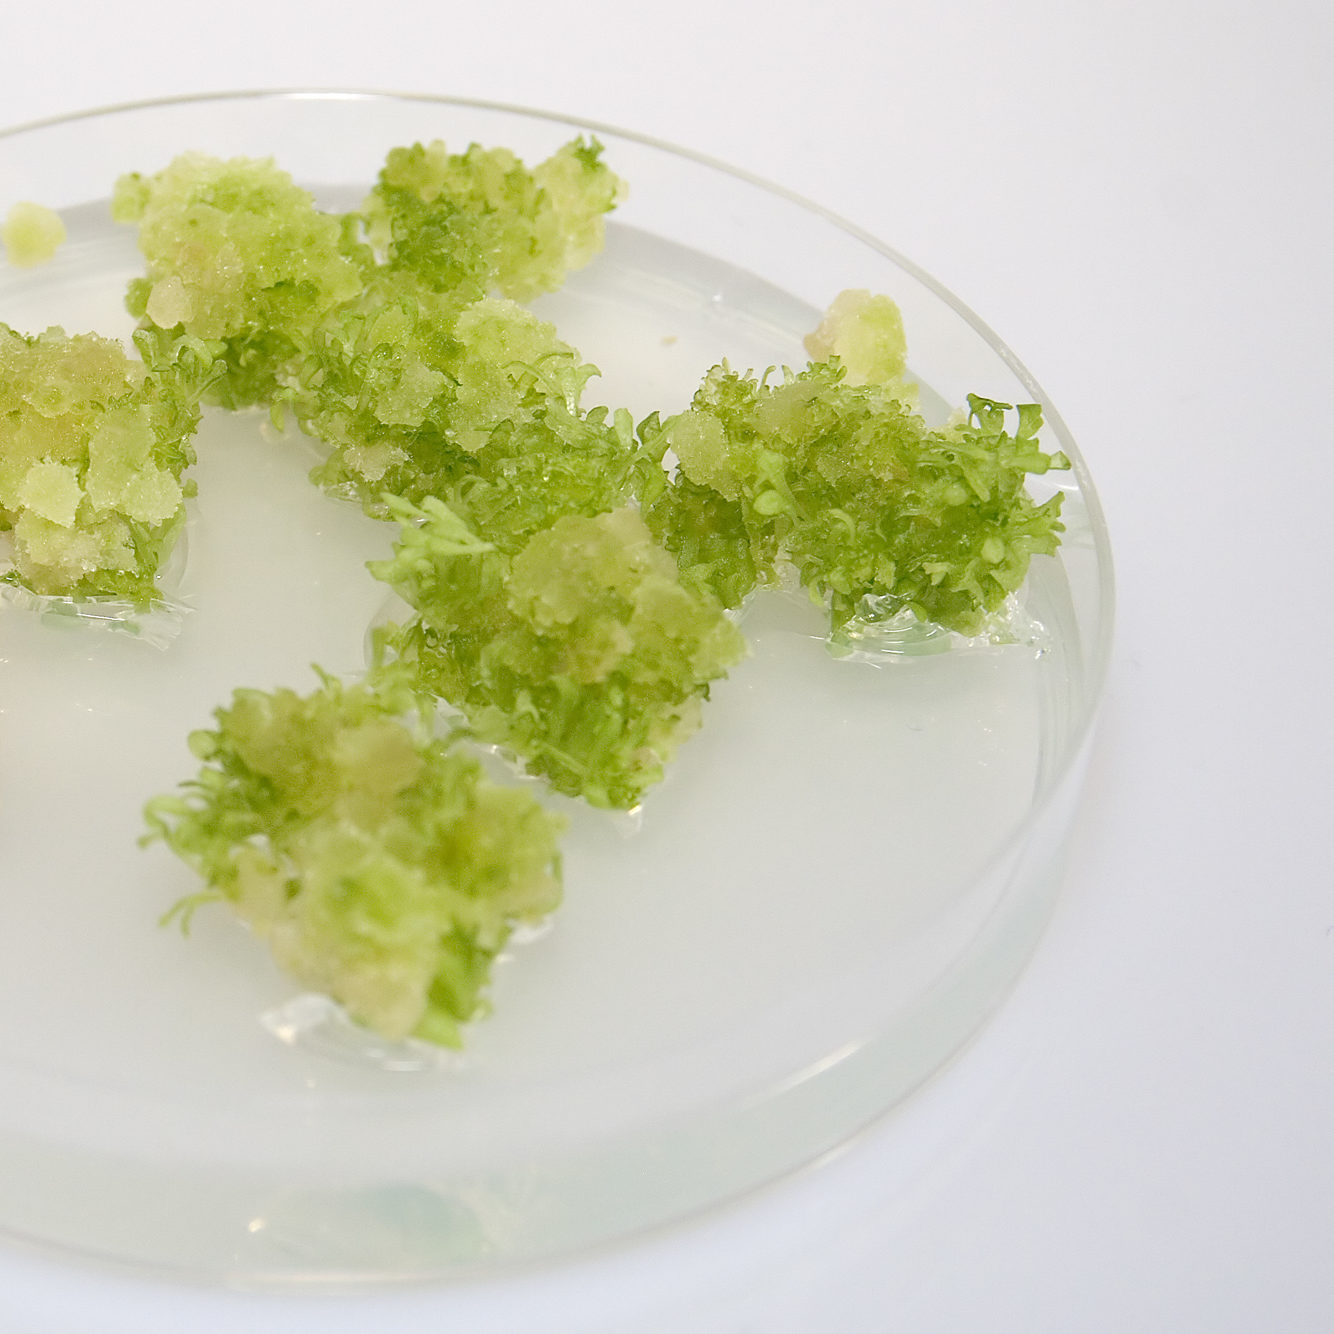 green plant matter sits in a Petri dish on a white countertop 